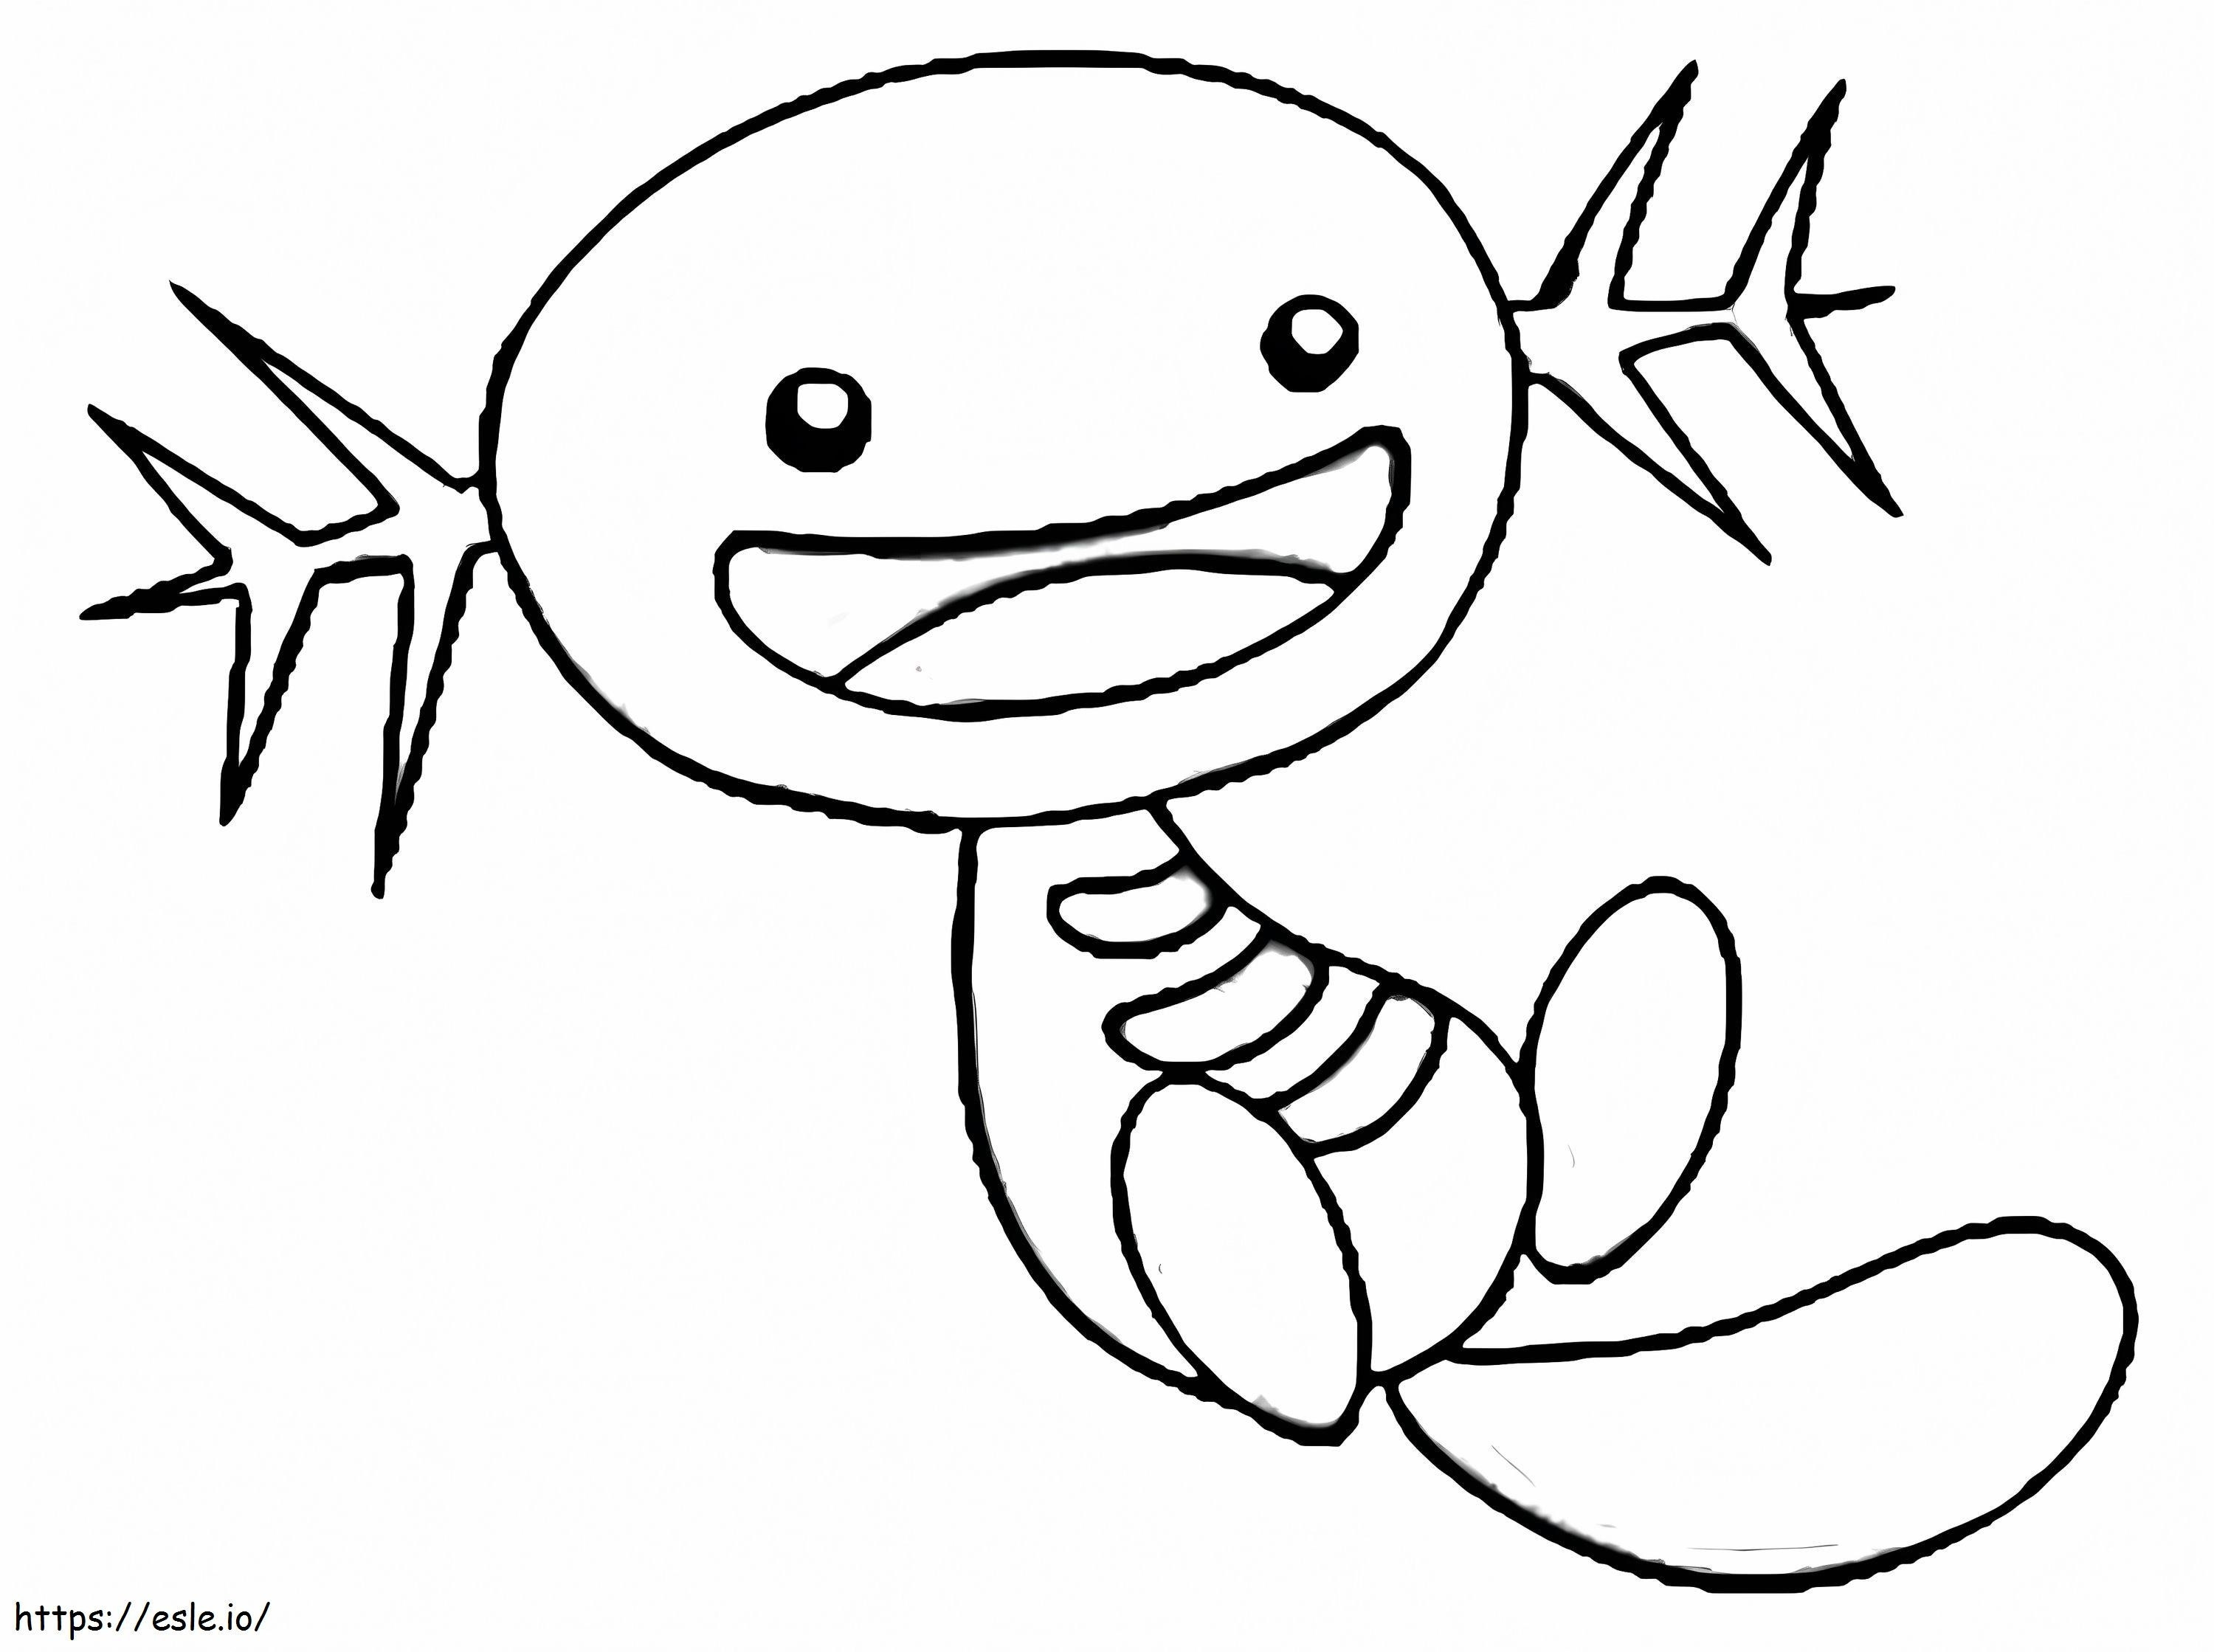 Wooper 1 coloring page